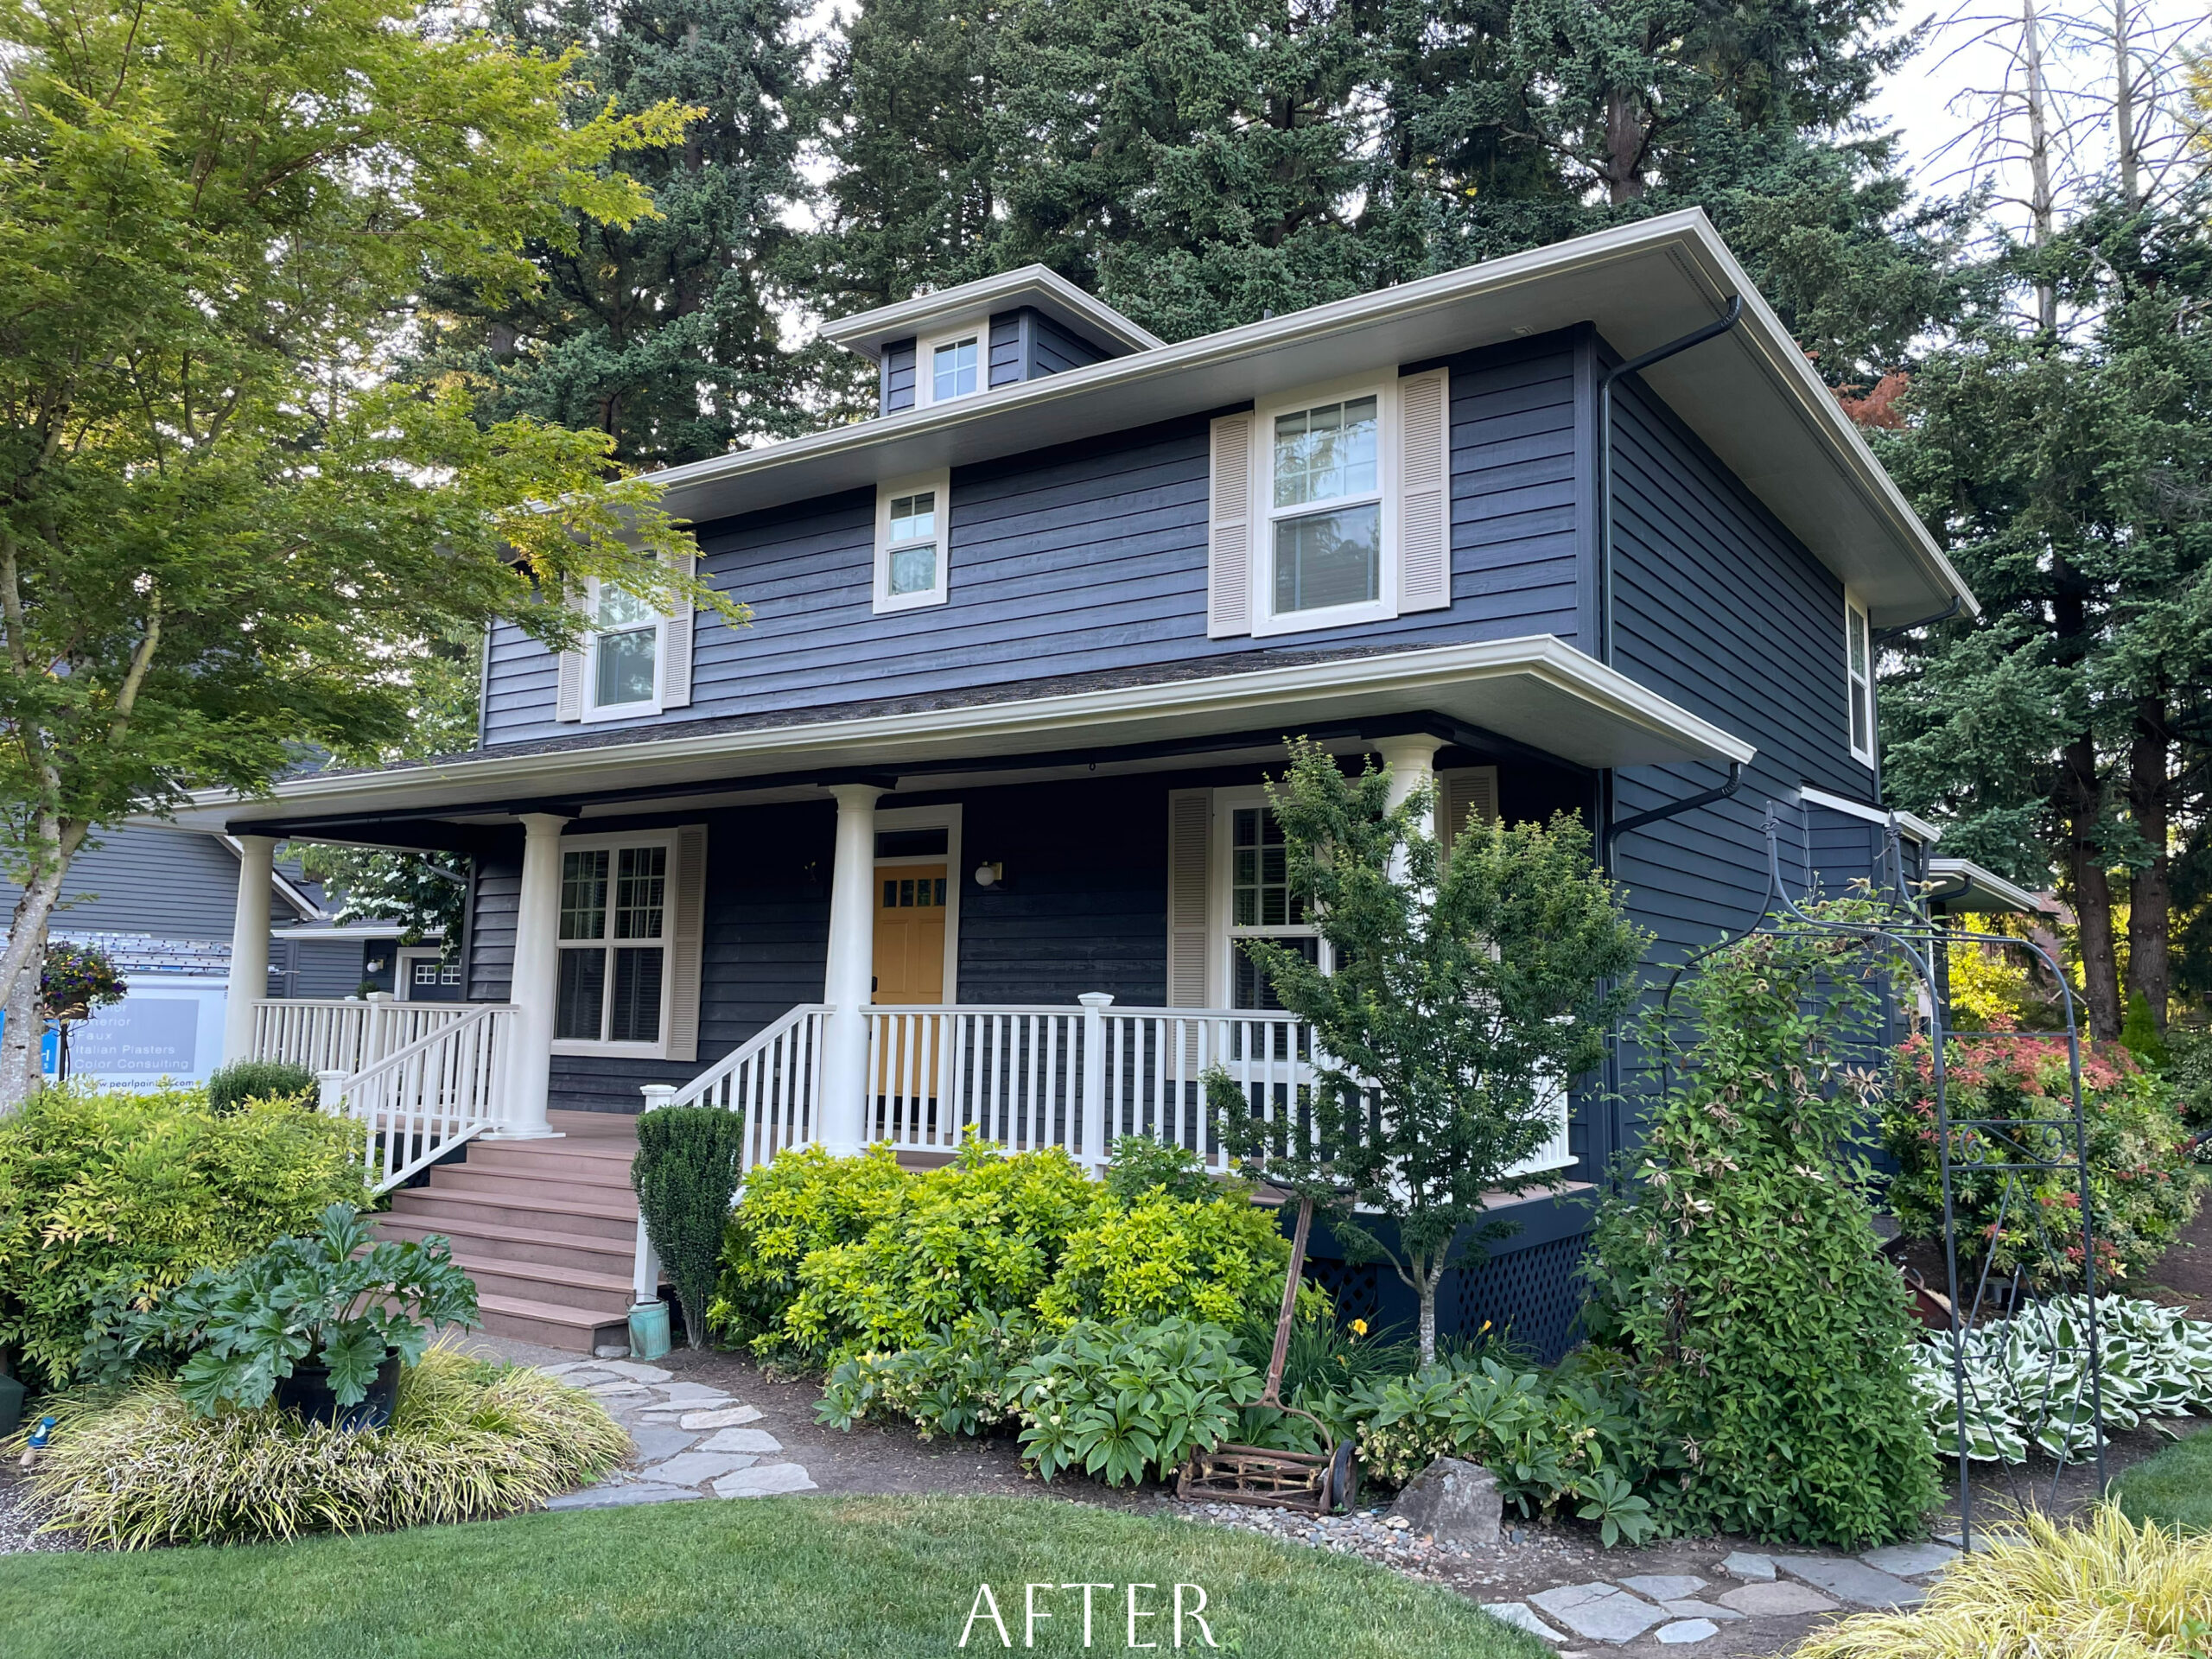 Photo of Exterior Paint Job After 20 Years Makes a Magical Impression in This West Linn Neighborhood! in Portland, Oregon